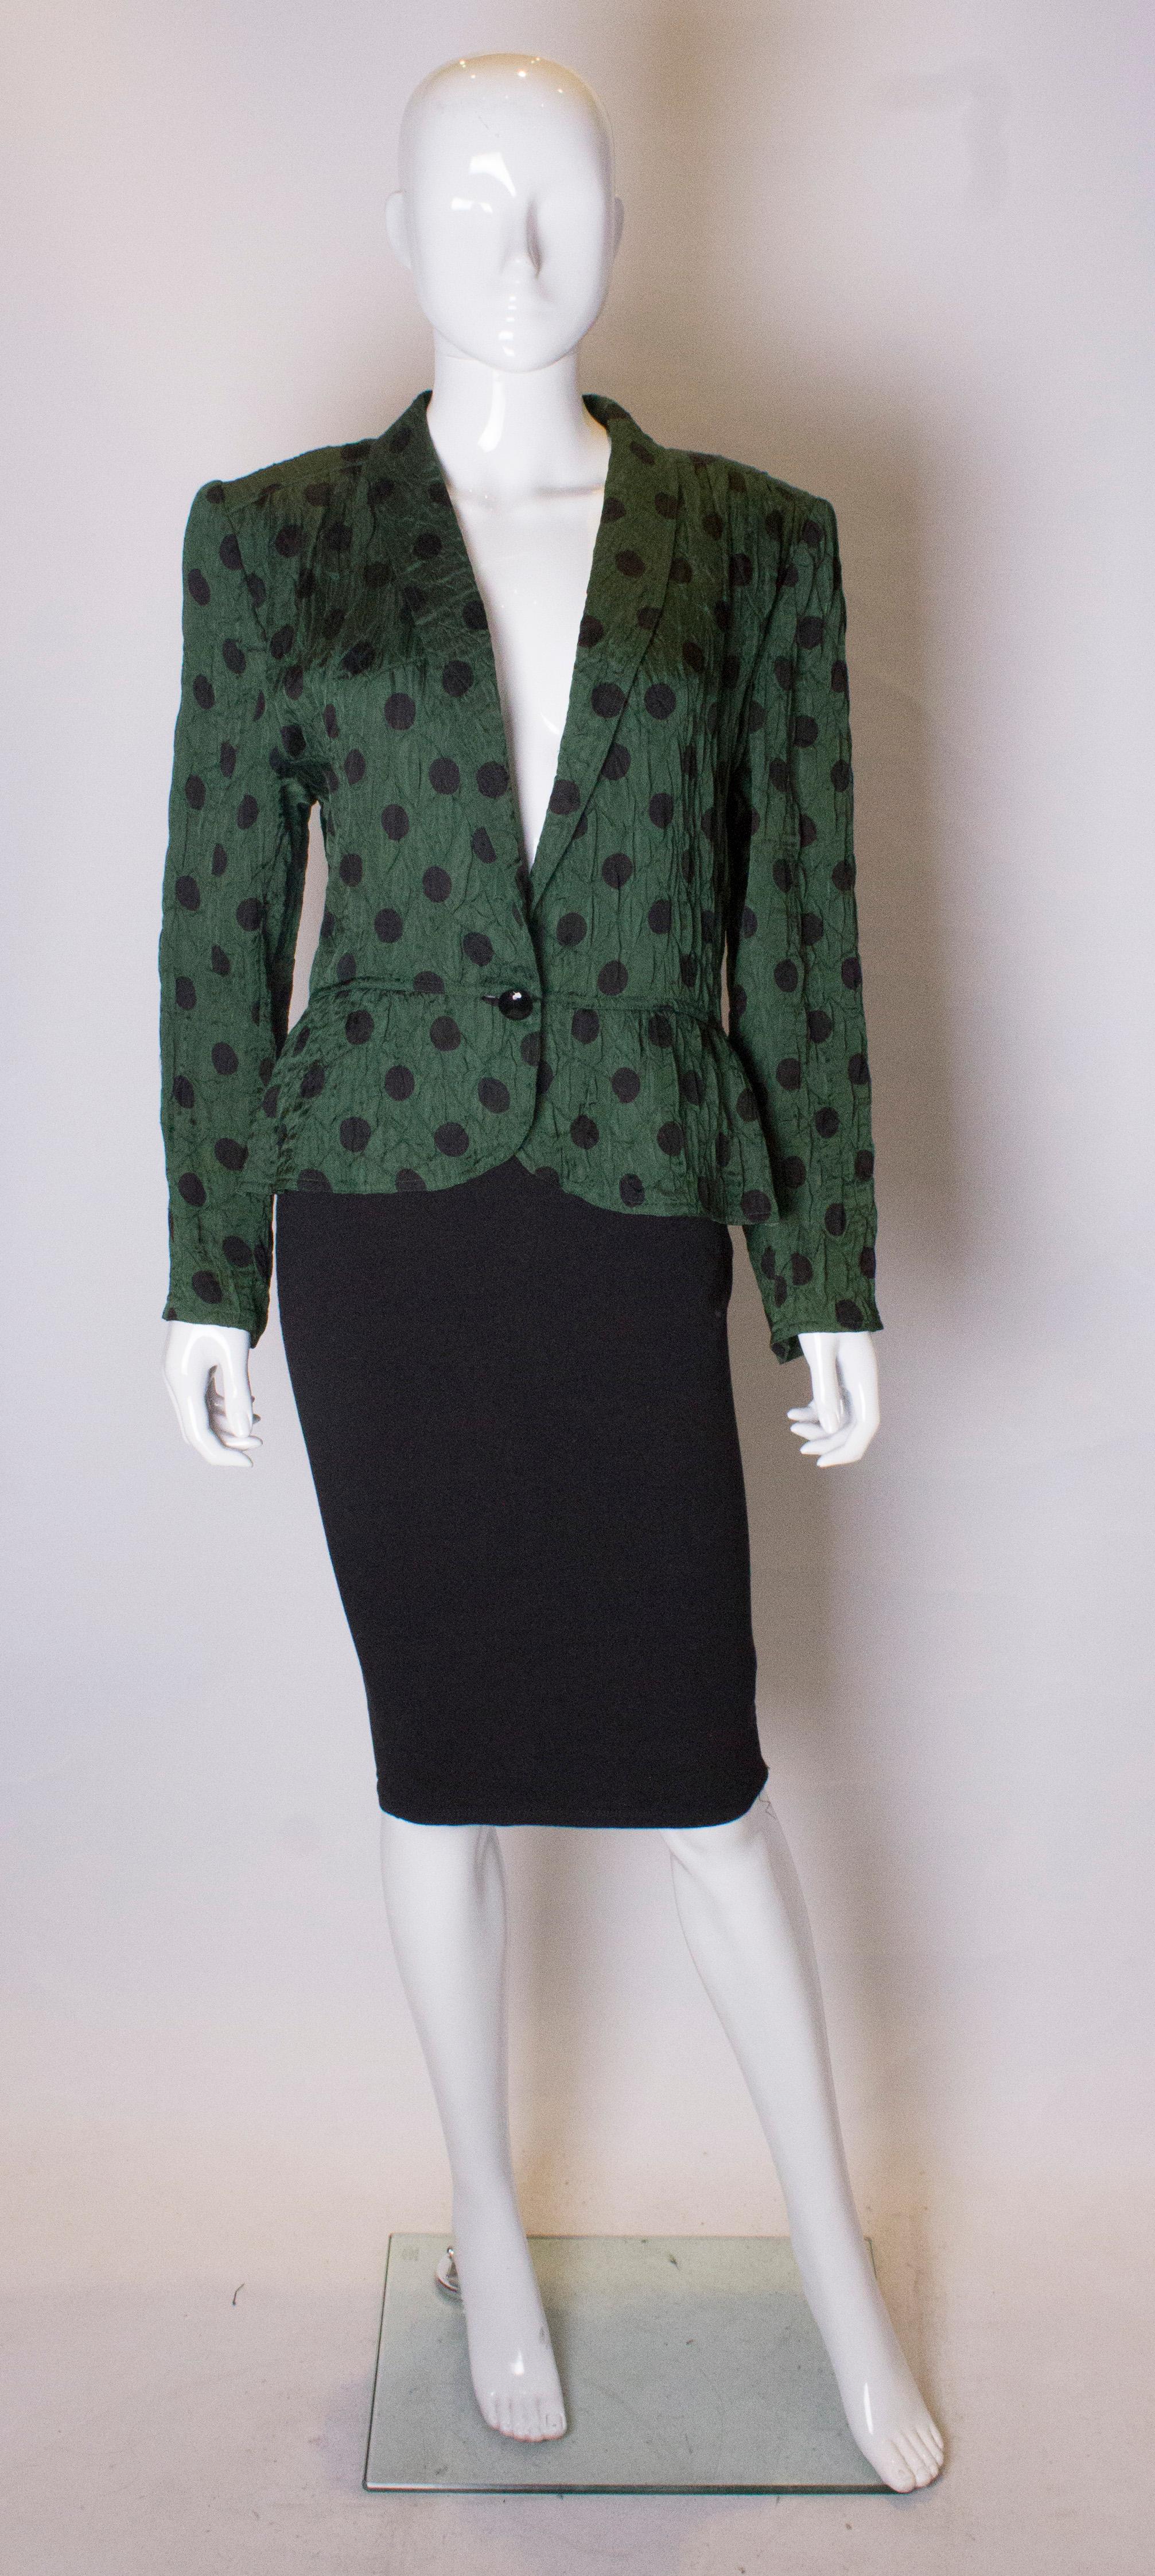 A chic jacket by Roland Klein.The jacket is in a sage green silk with black dots and a peplum. It has a shawl collar and single button fastening at waist leval.
